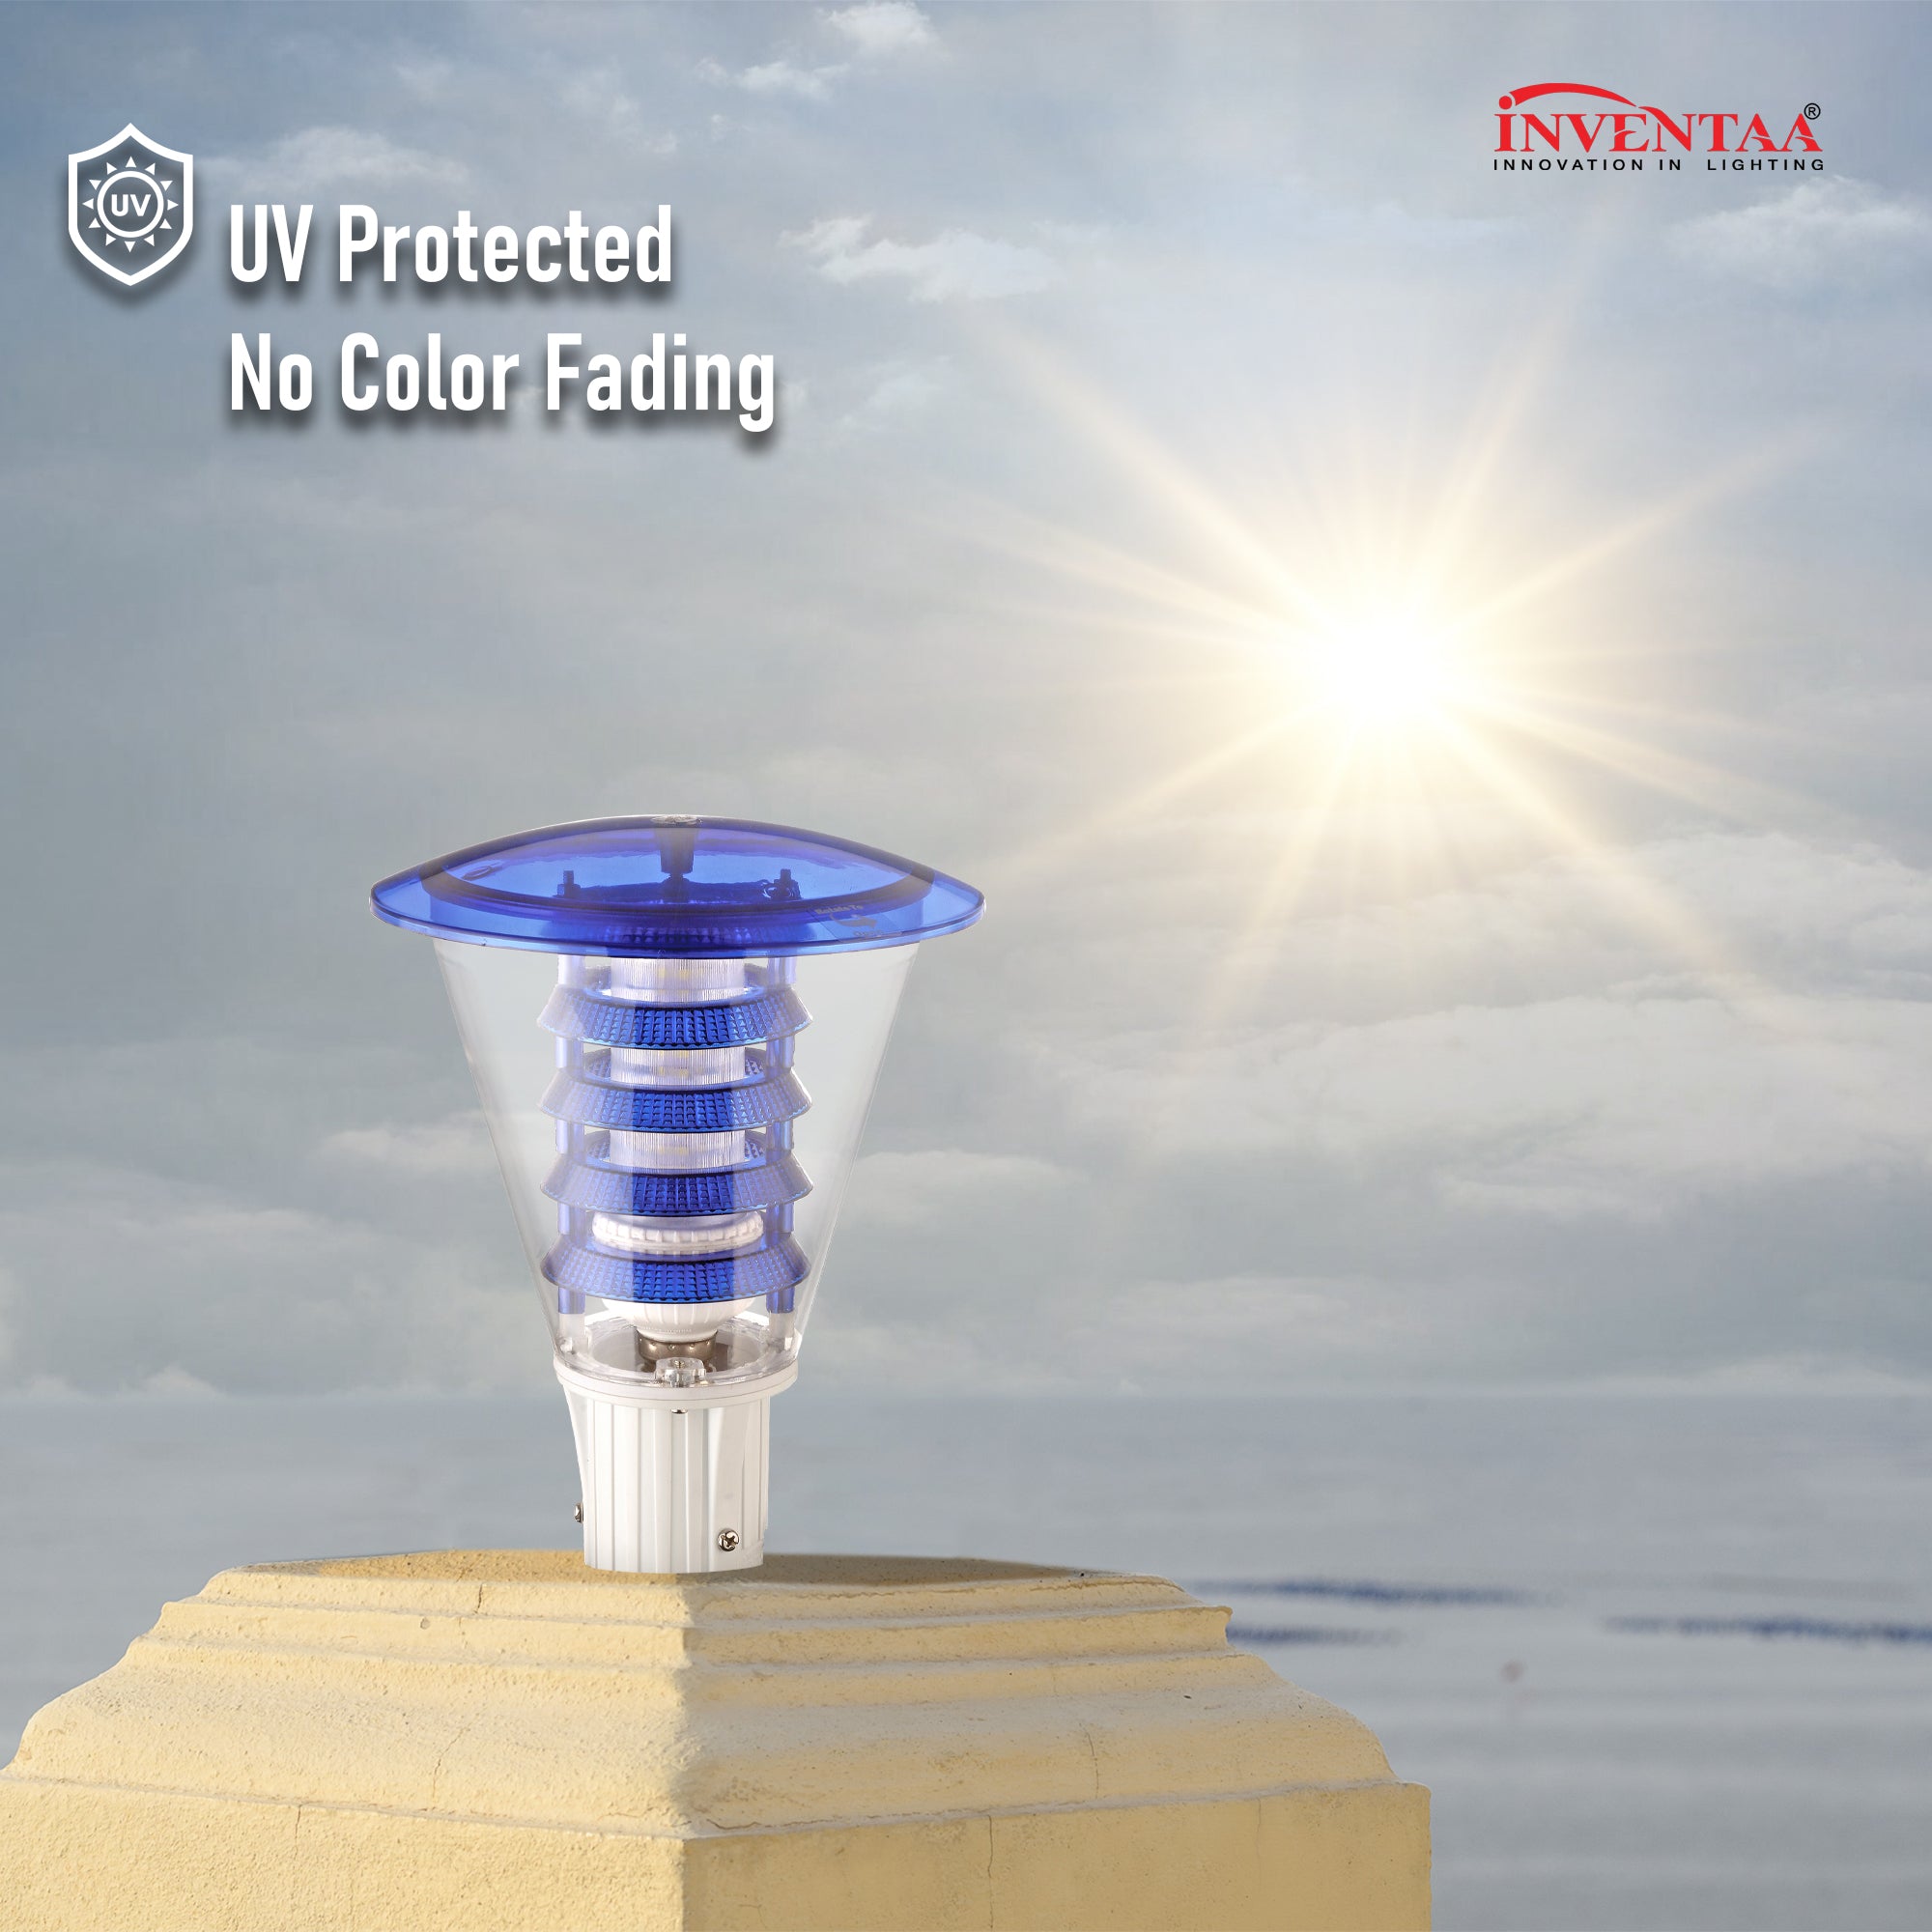 Mini olivia led gate light with UV protection and no color fading #bulb options_cool